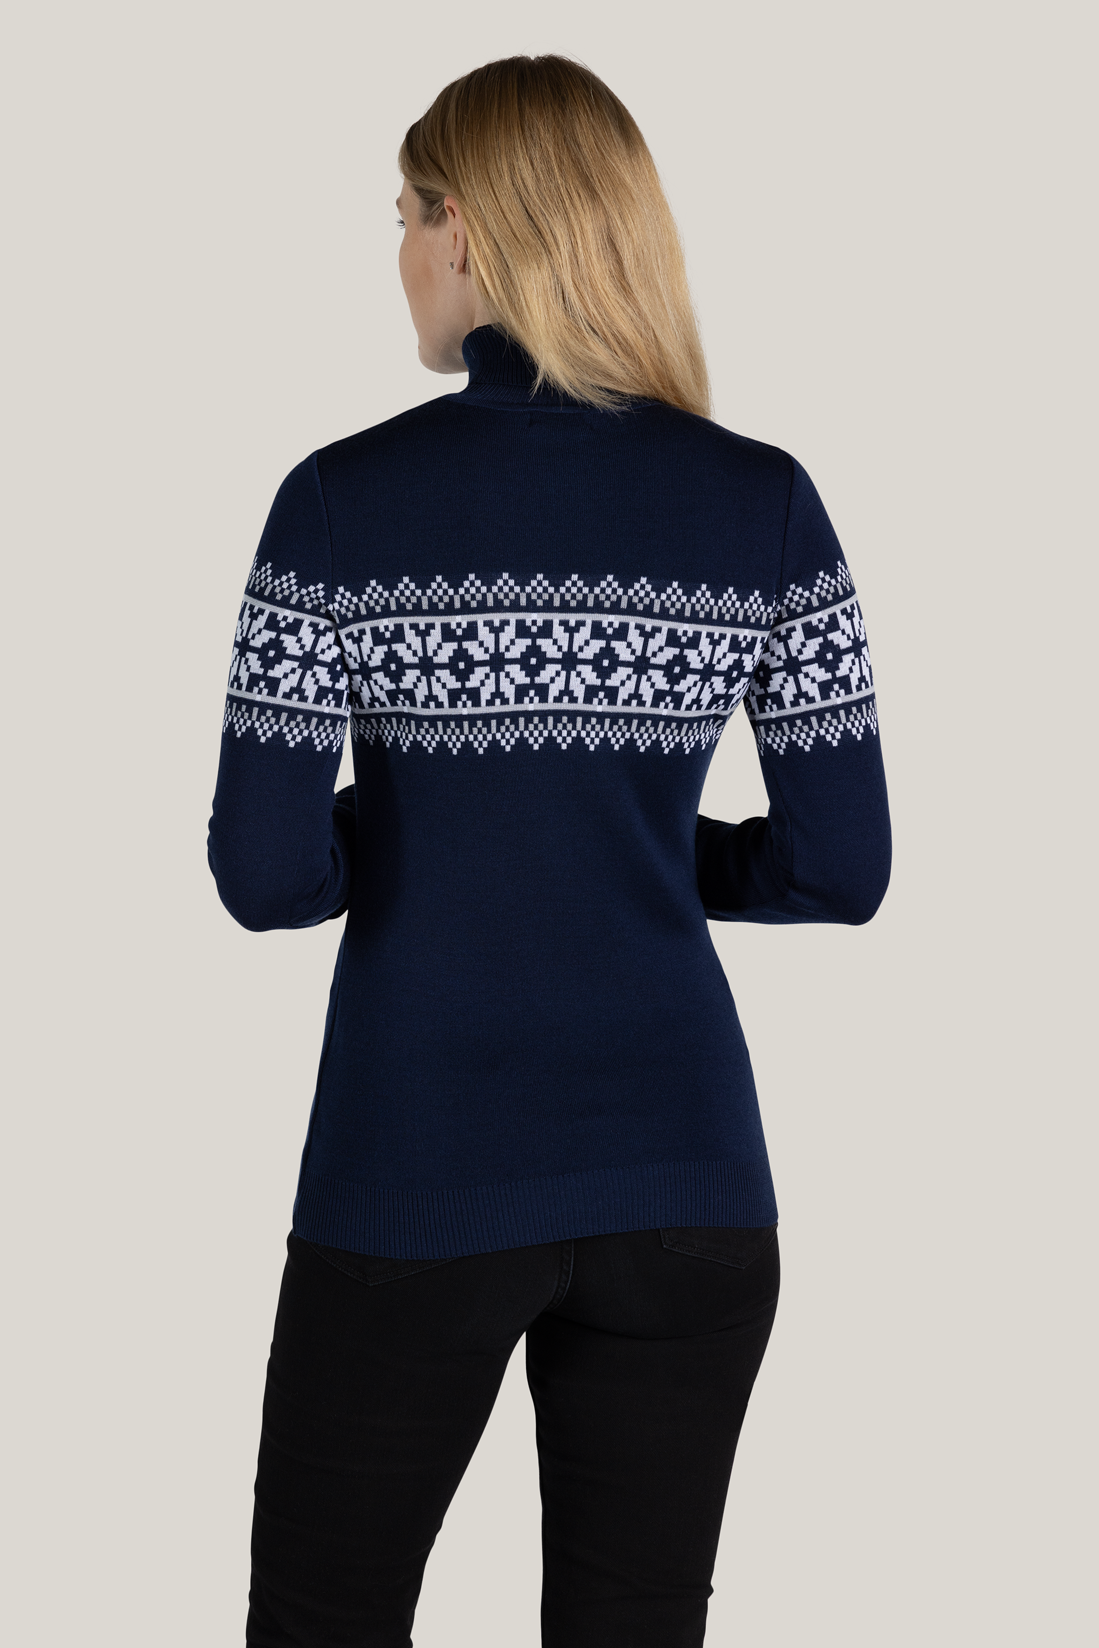 Turtleneck sweater Liv in blue made of Merino and Tencel from Tidløs